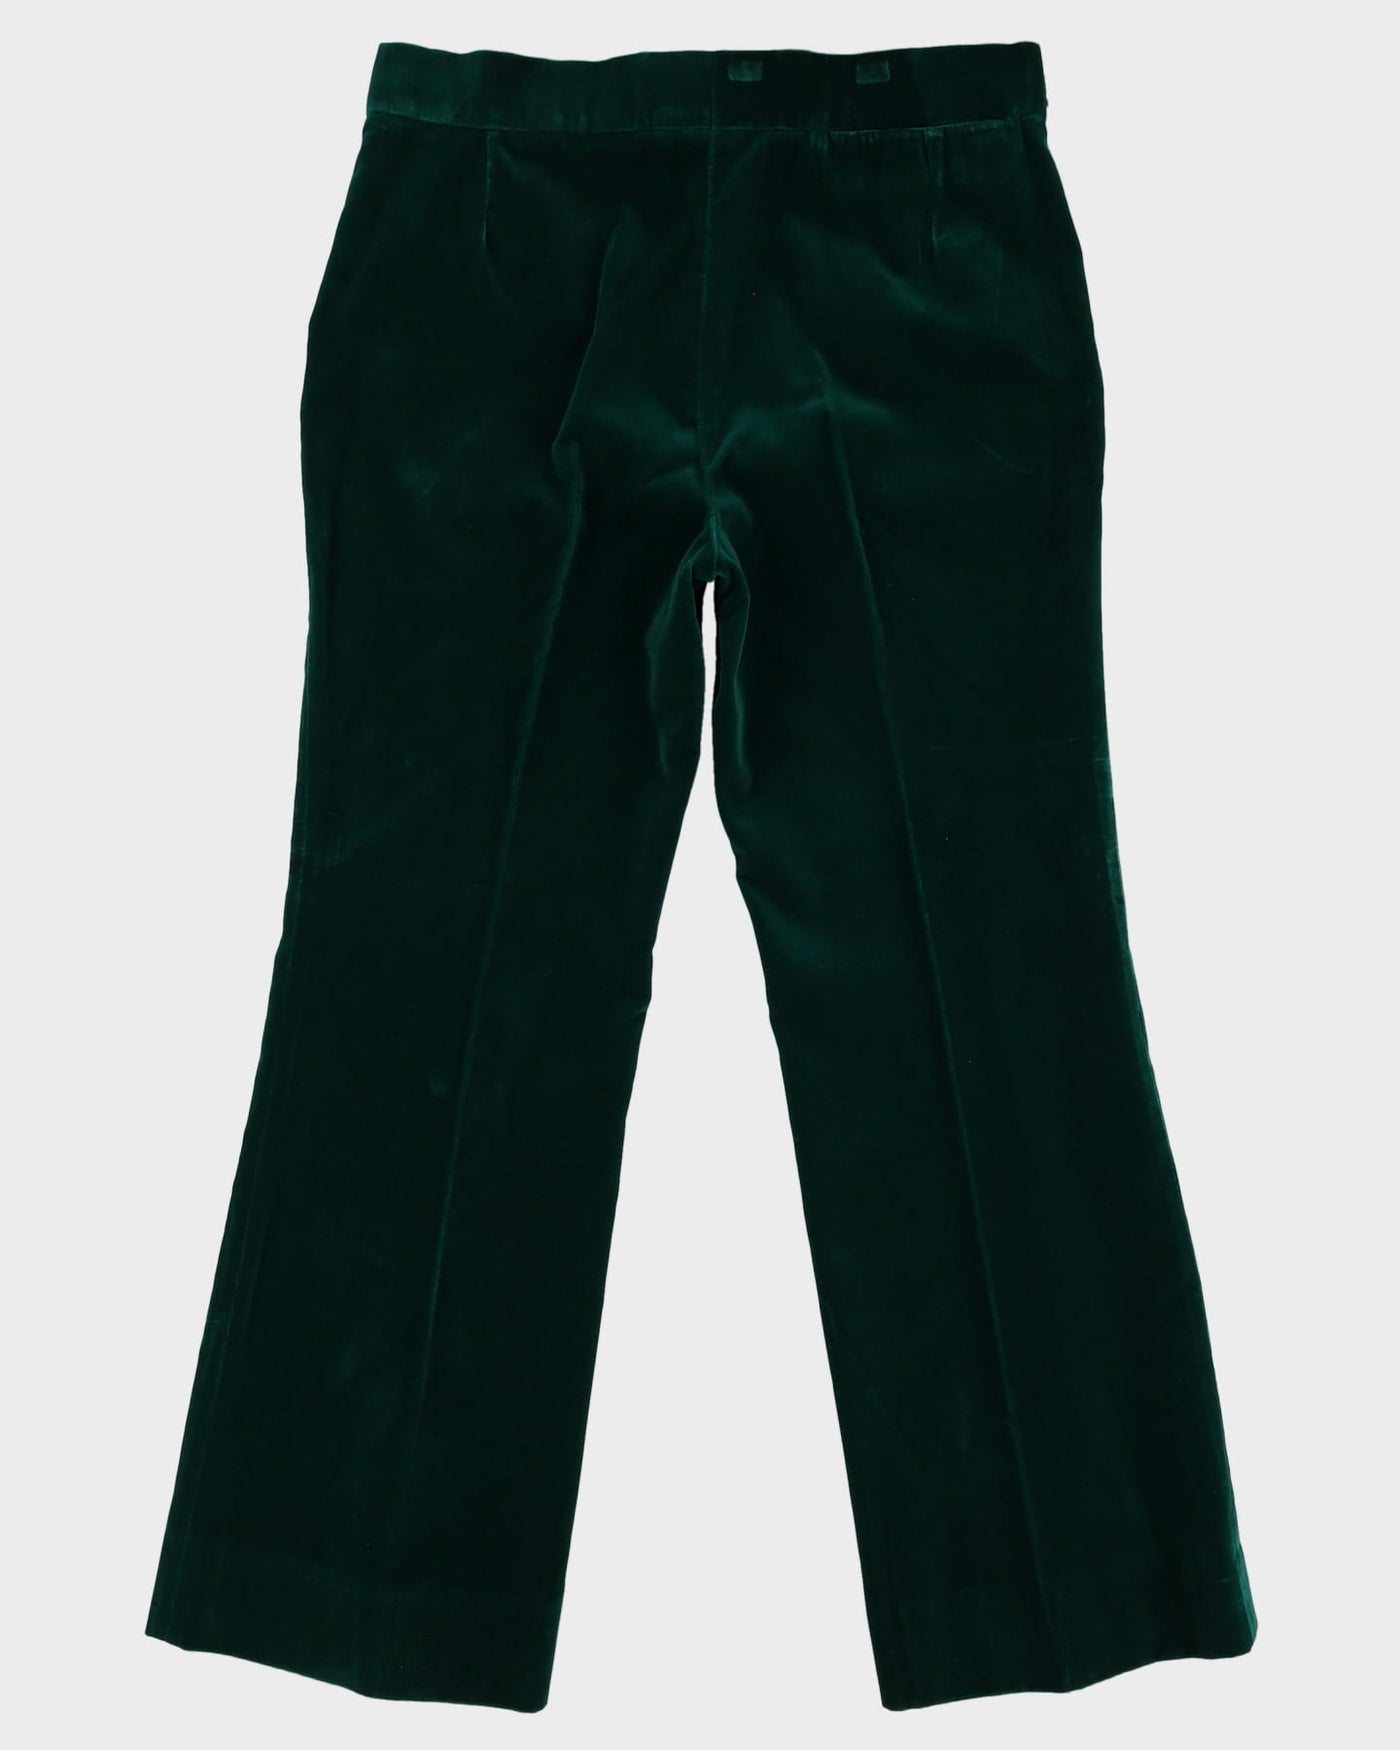 1970s Green Jacket And Trouser Suit - XL